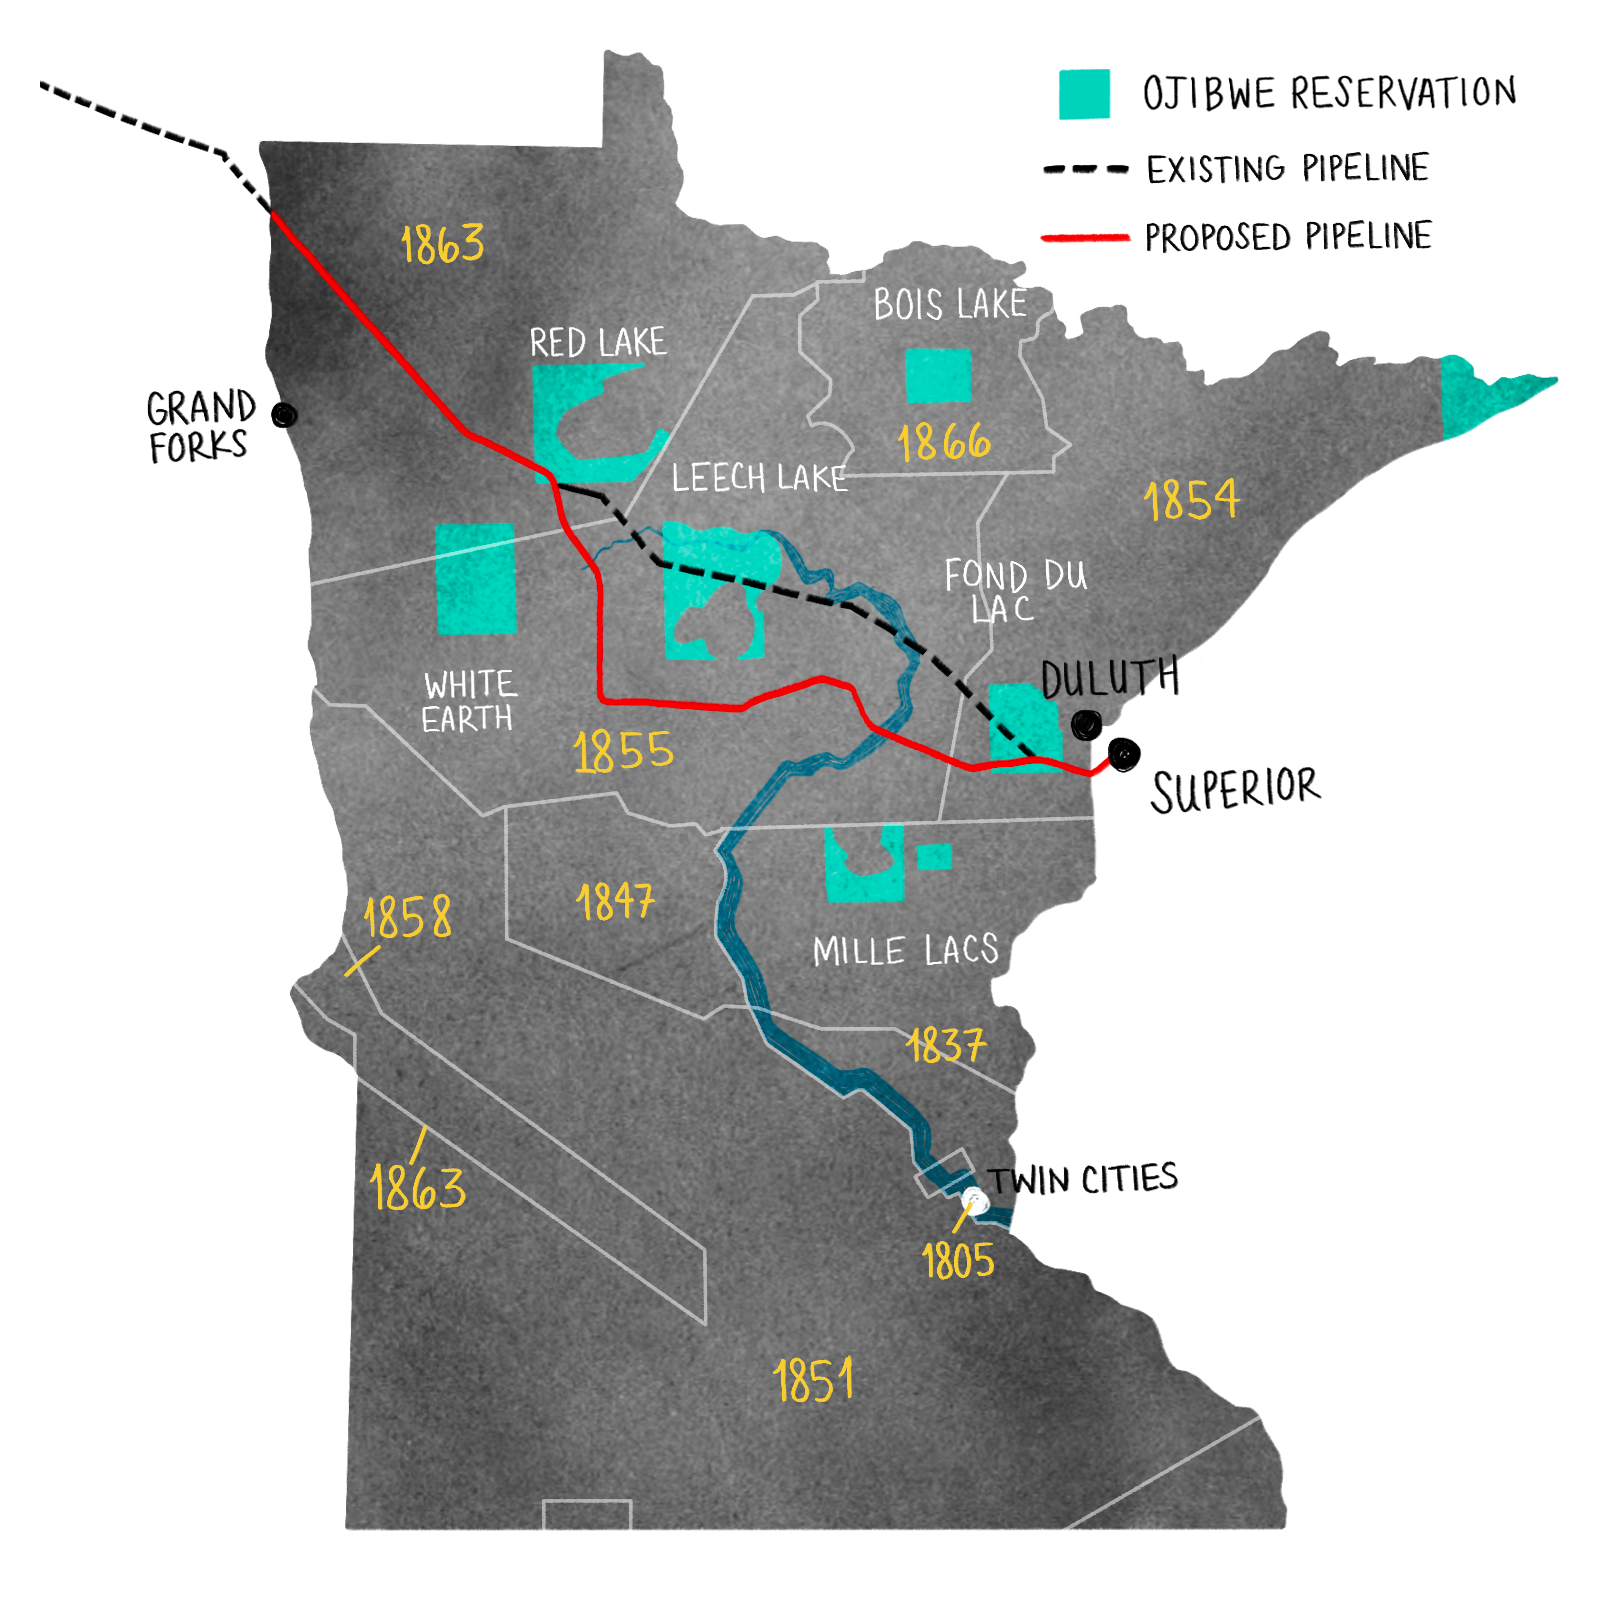 a map of Minnesota with the proposed Line 3 pipeline route marked as well as Ojibwe treaty border and reservations marked